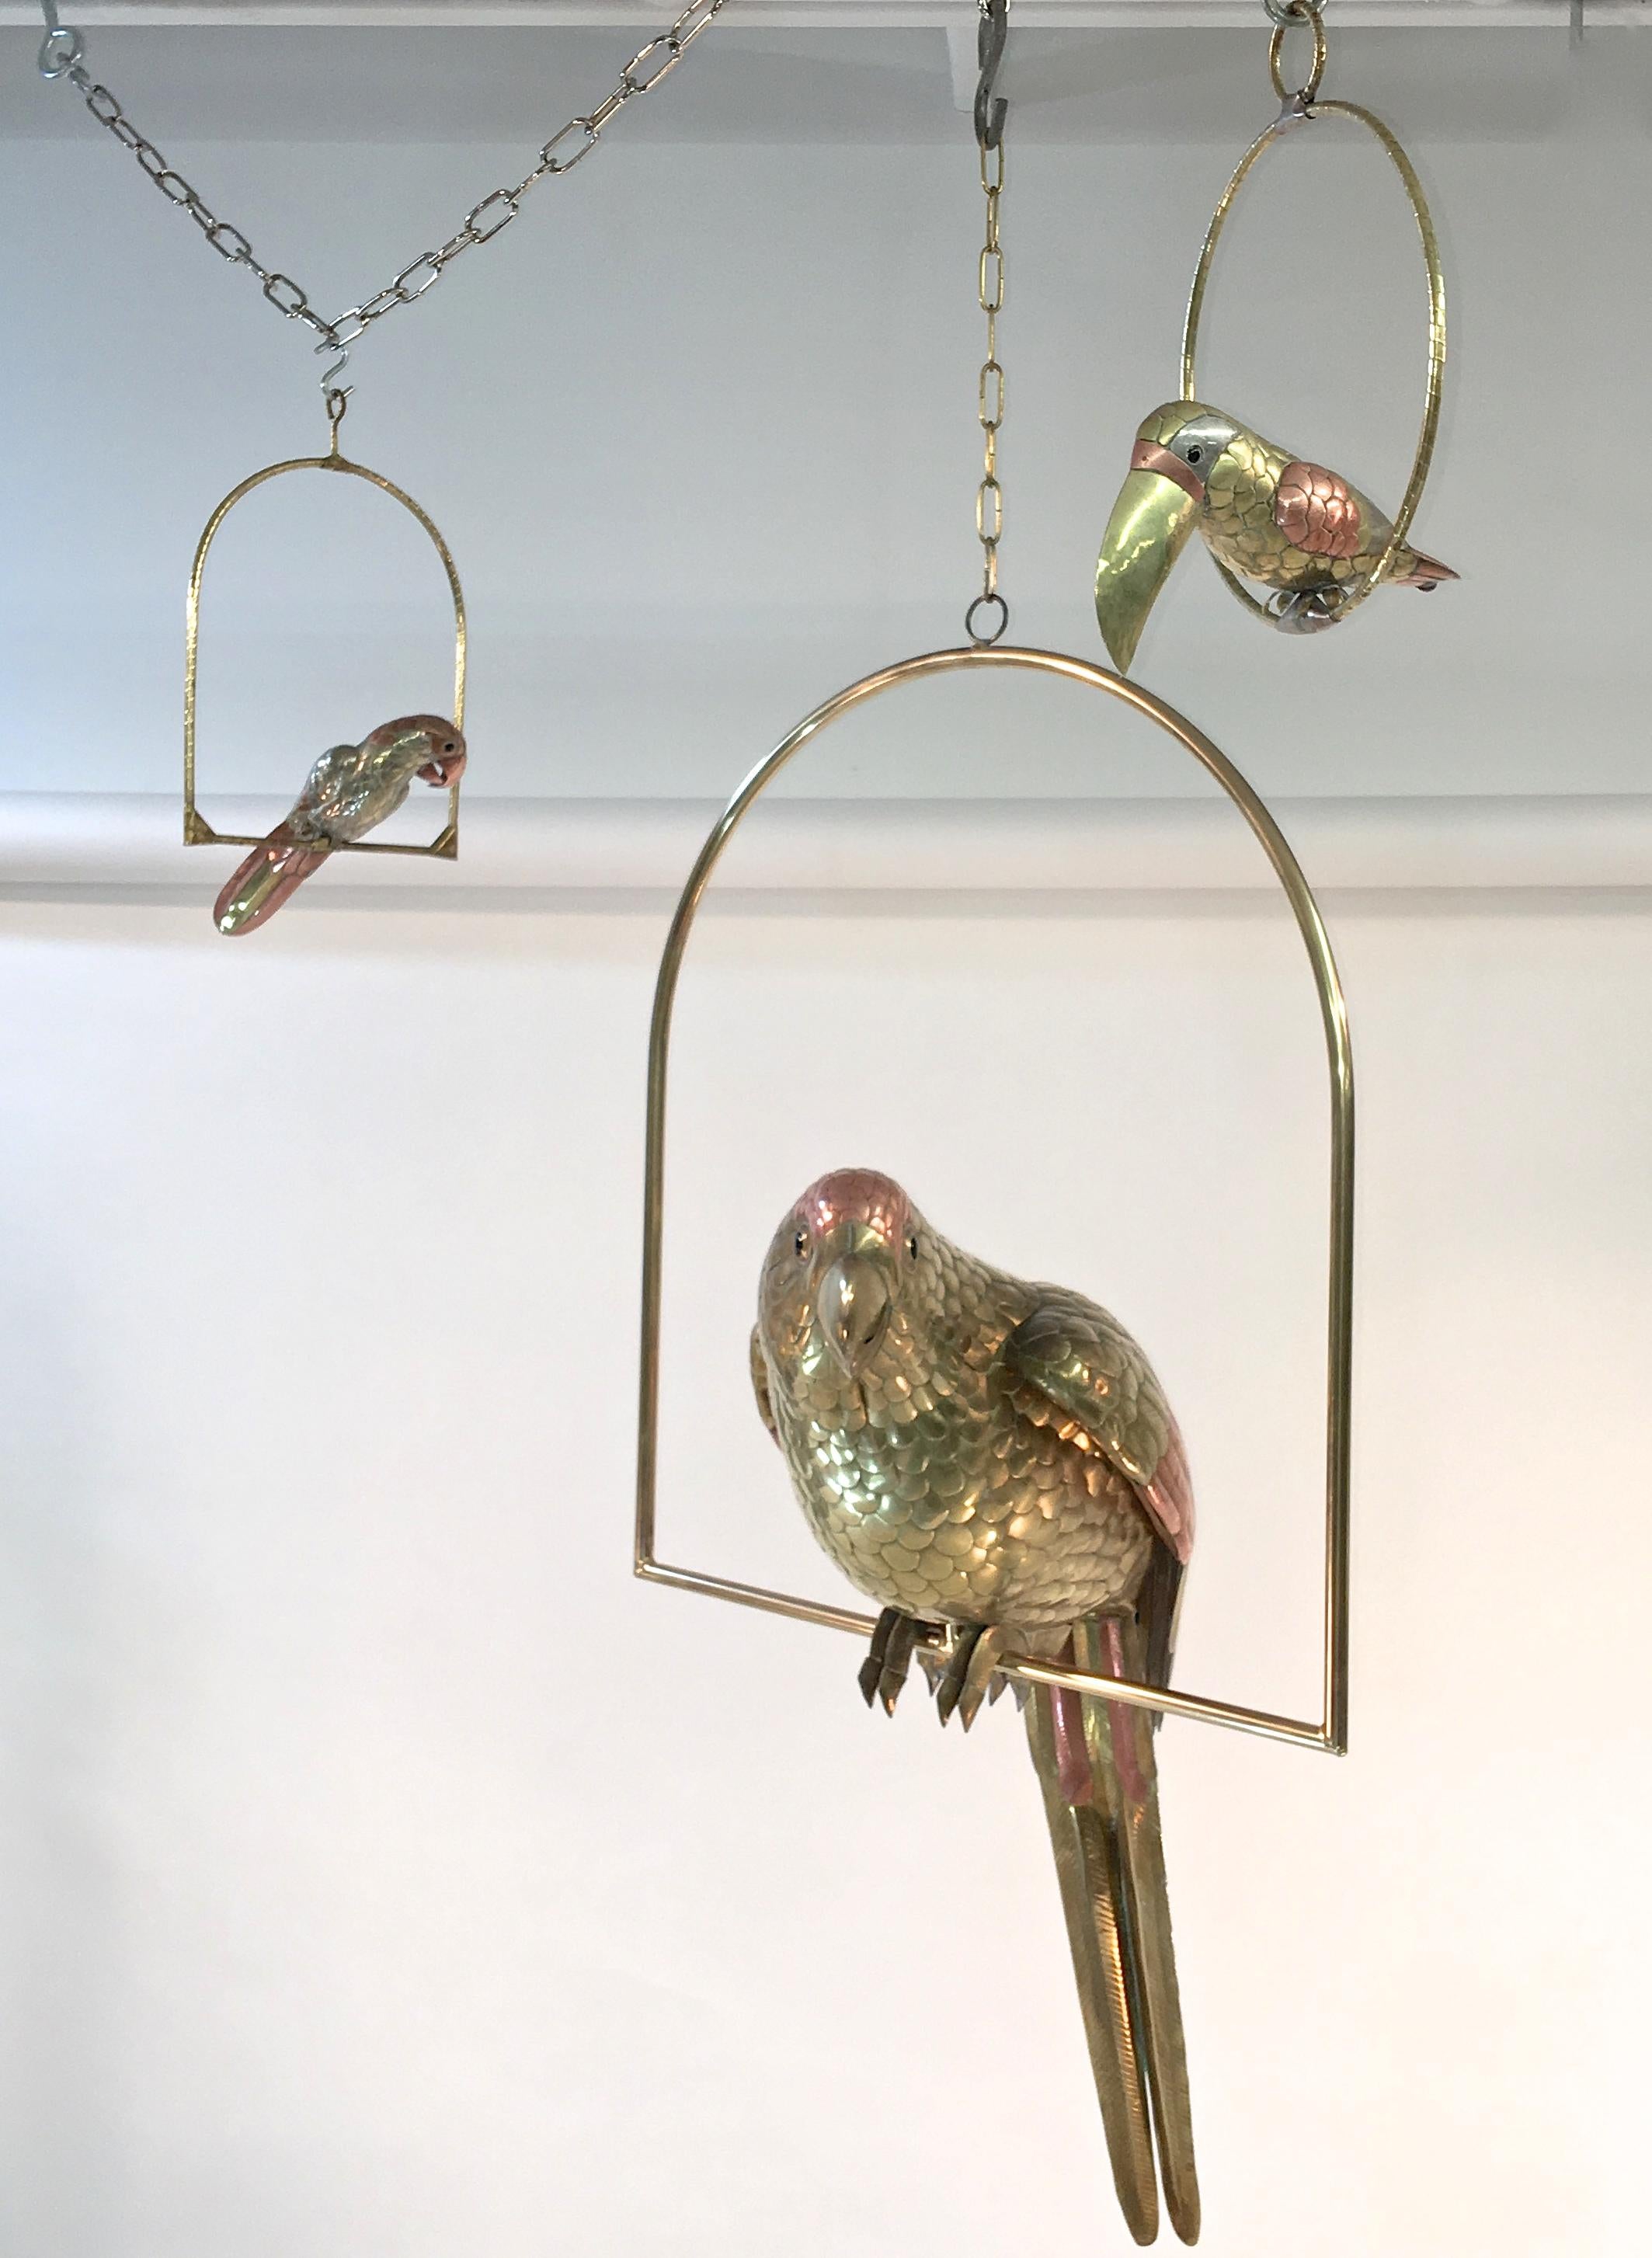 The craftsmanship and vitality of Bustamante's birds is astonishing.

Presented here is a group of three; one large parrot, one small parrot and one toucan, Mexico, 1960s.

Handcrafted from brass and copper. The small parrot also has